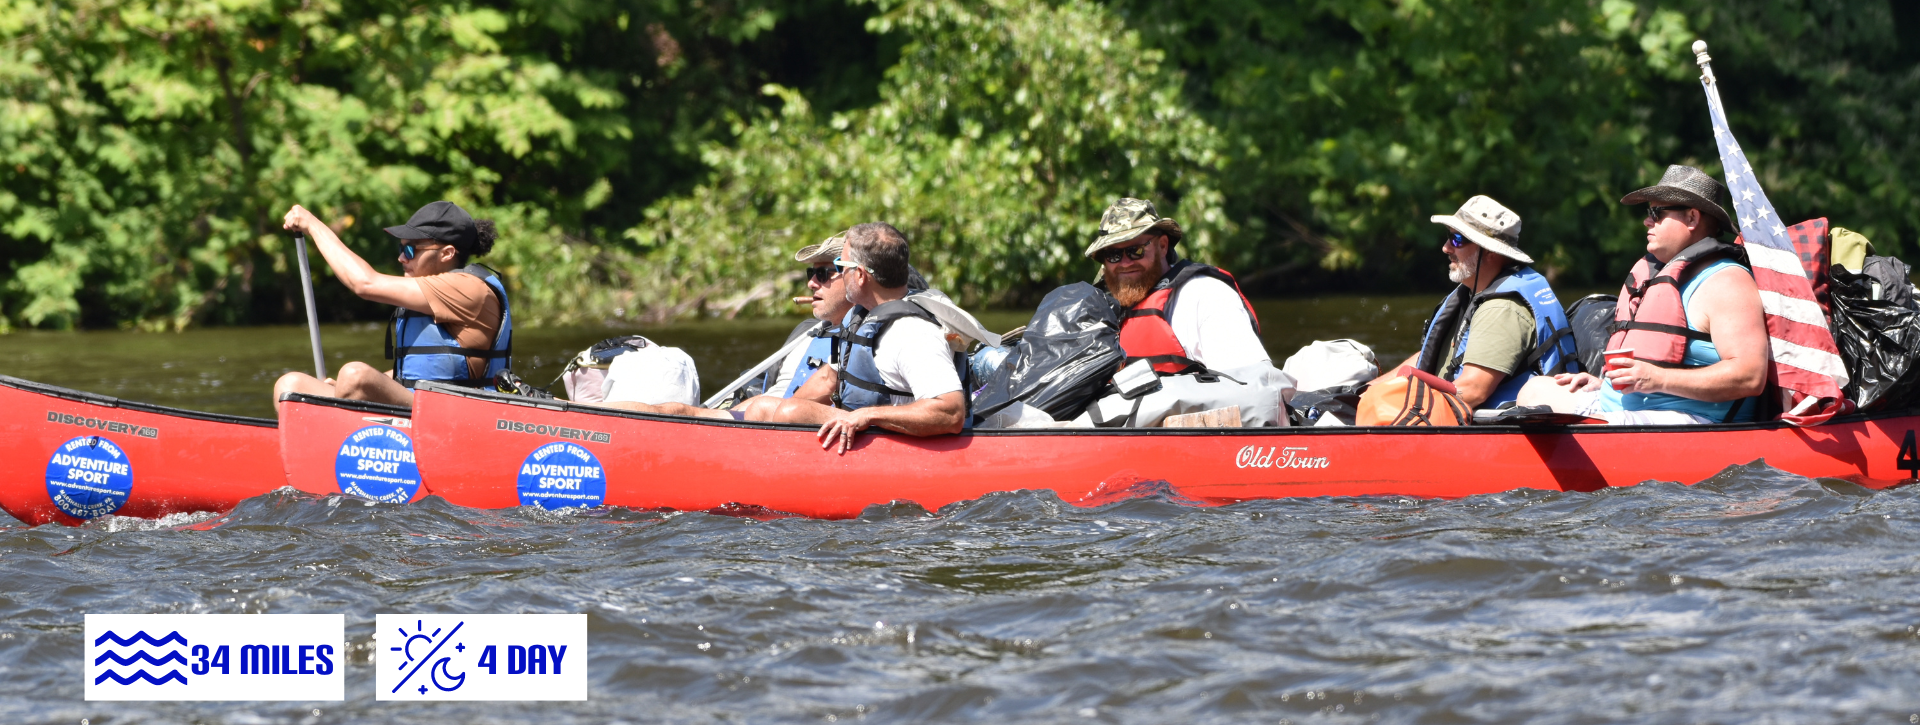 A group of people are in a red canoe from adventure sports on Delaware river.